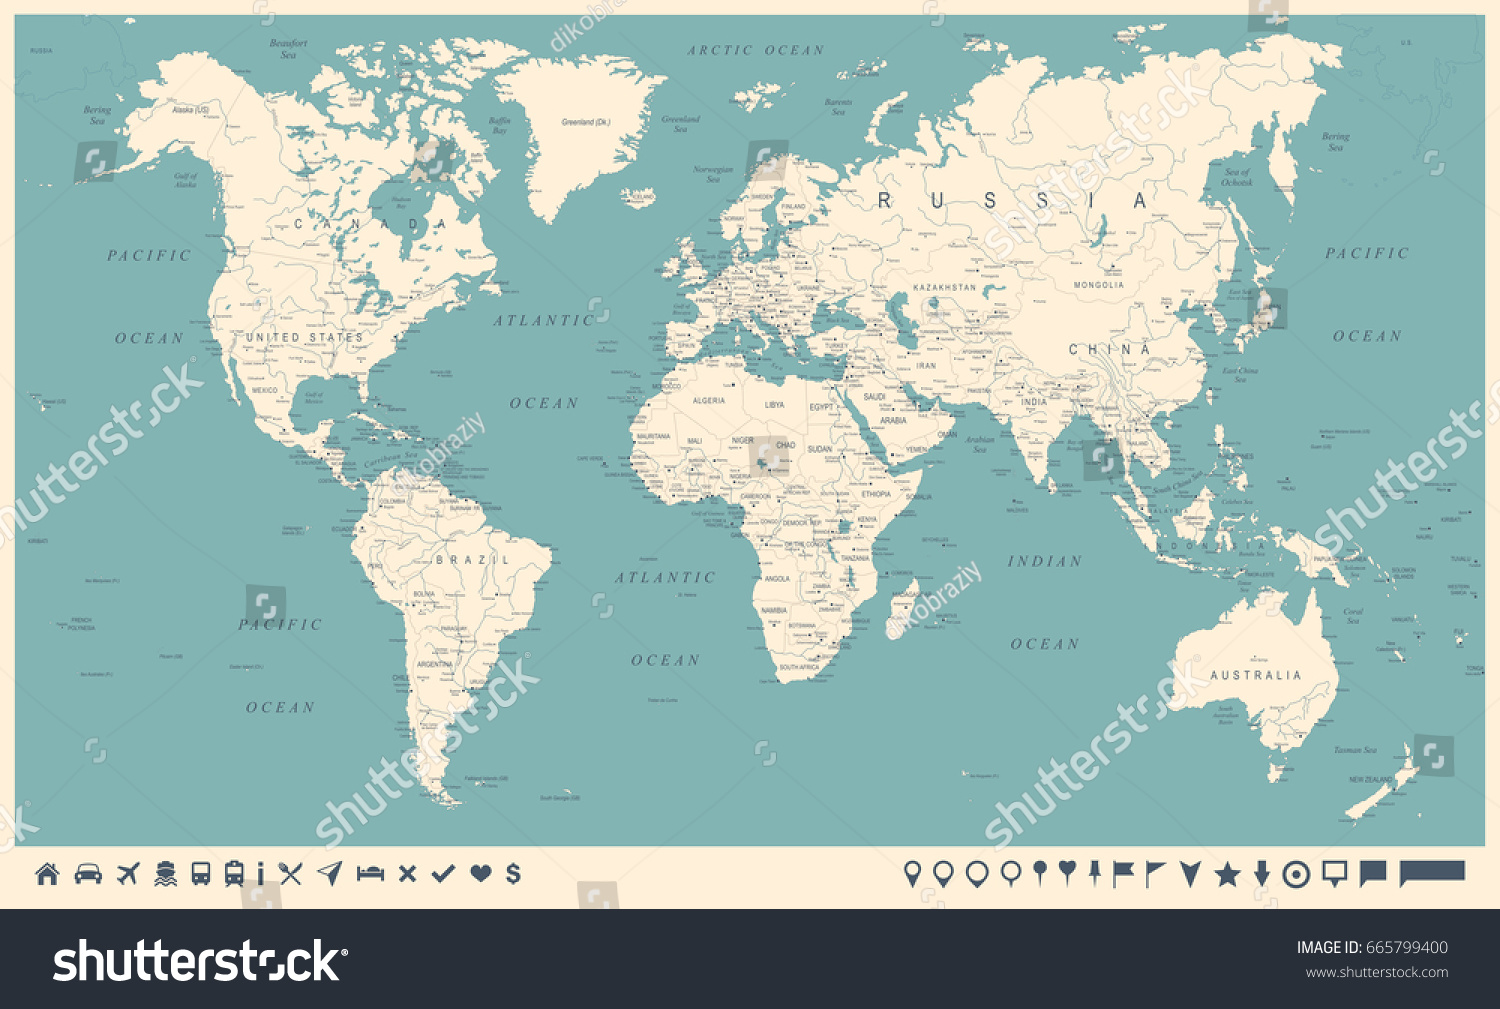 Vintage World Map and Markers - Detailed Vector Illustration #665799400